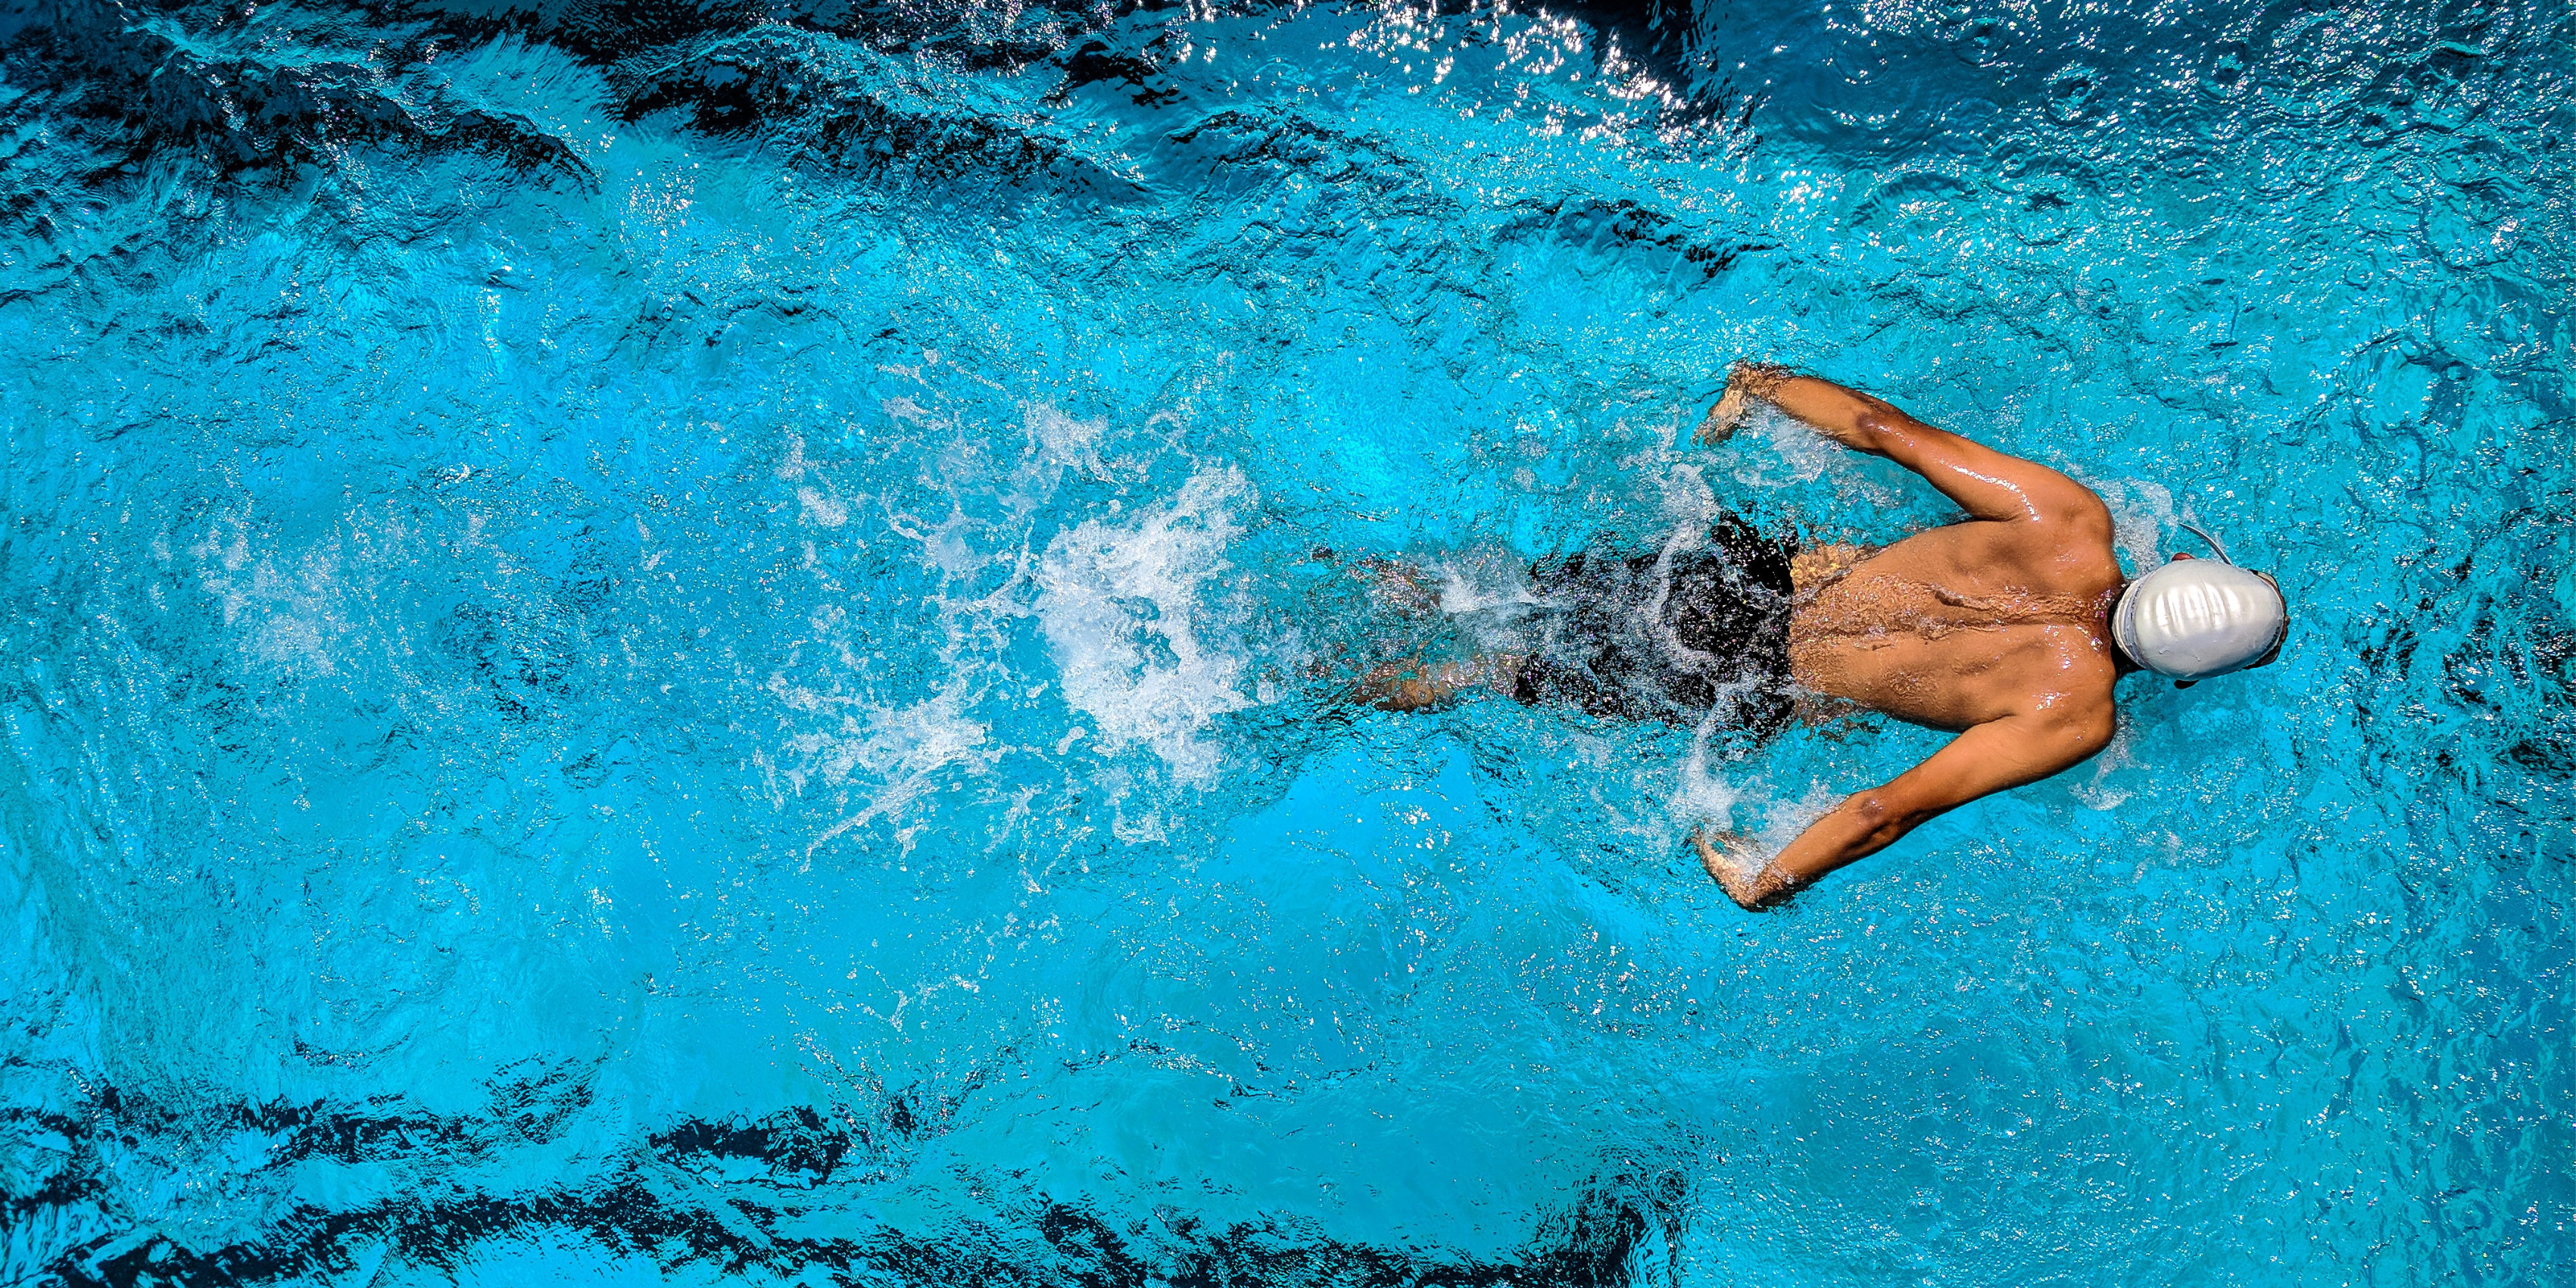 The Top 8 Gifts For Swimmers: Go For Gift-Giving Gold